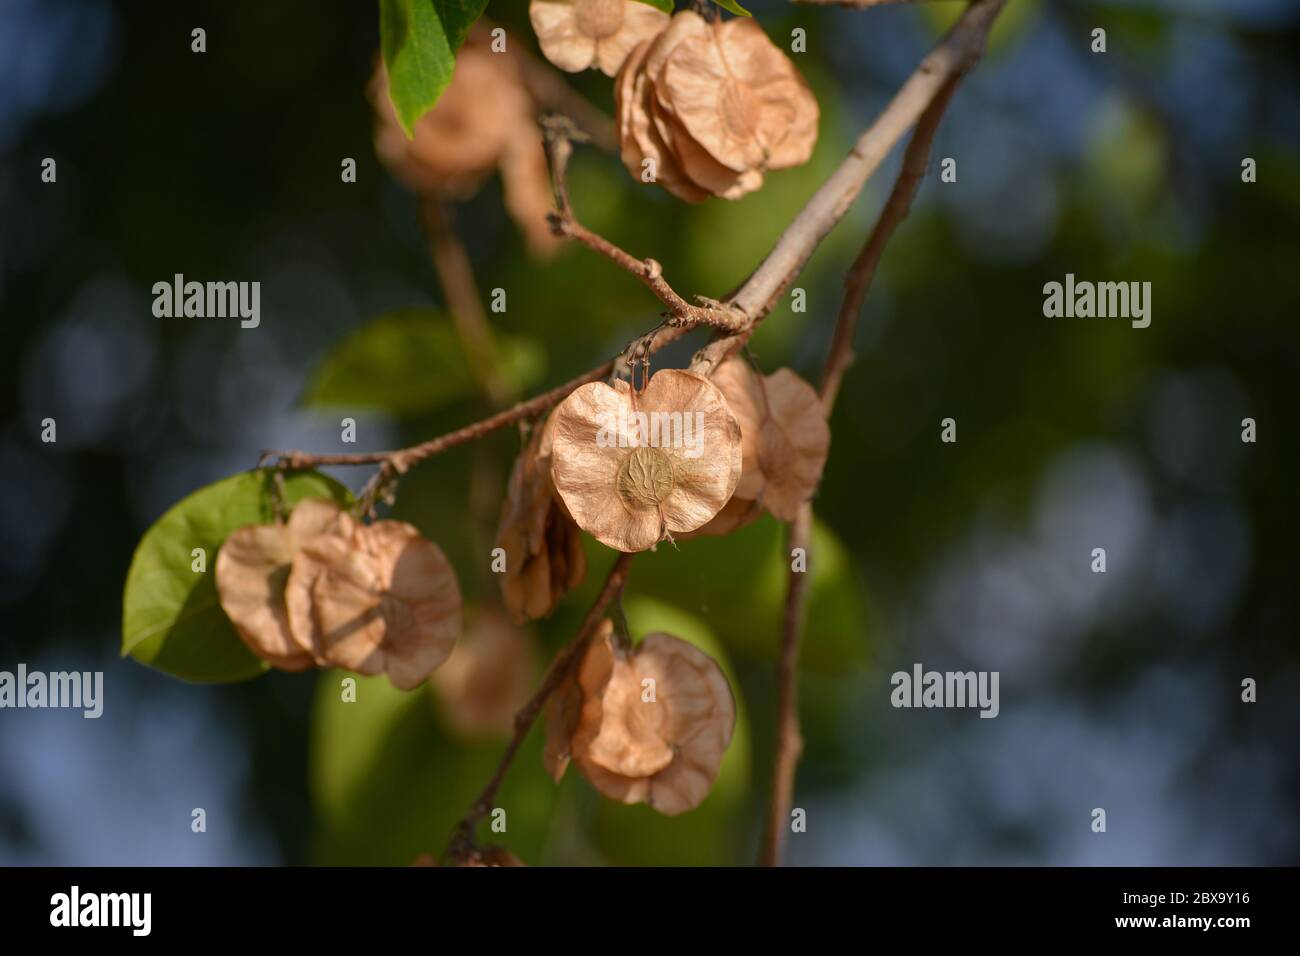 Organic air dried chilbil or Indian Elm (Holoptelea Integrifolia) seeds. Stock Photo